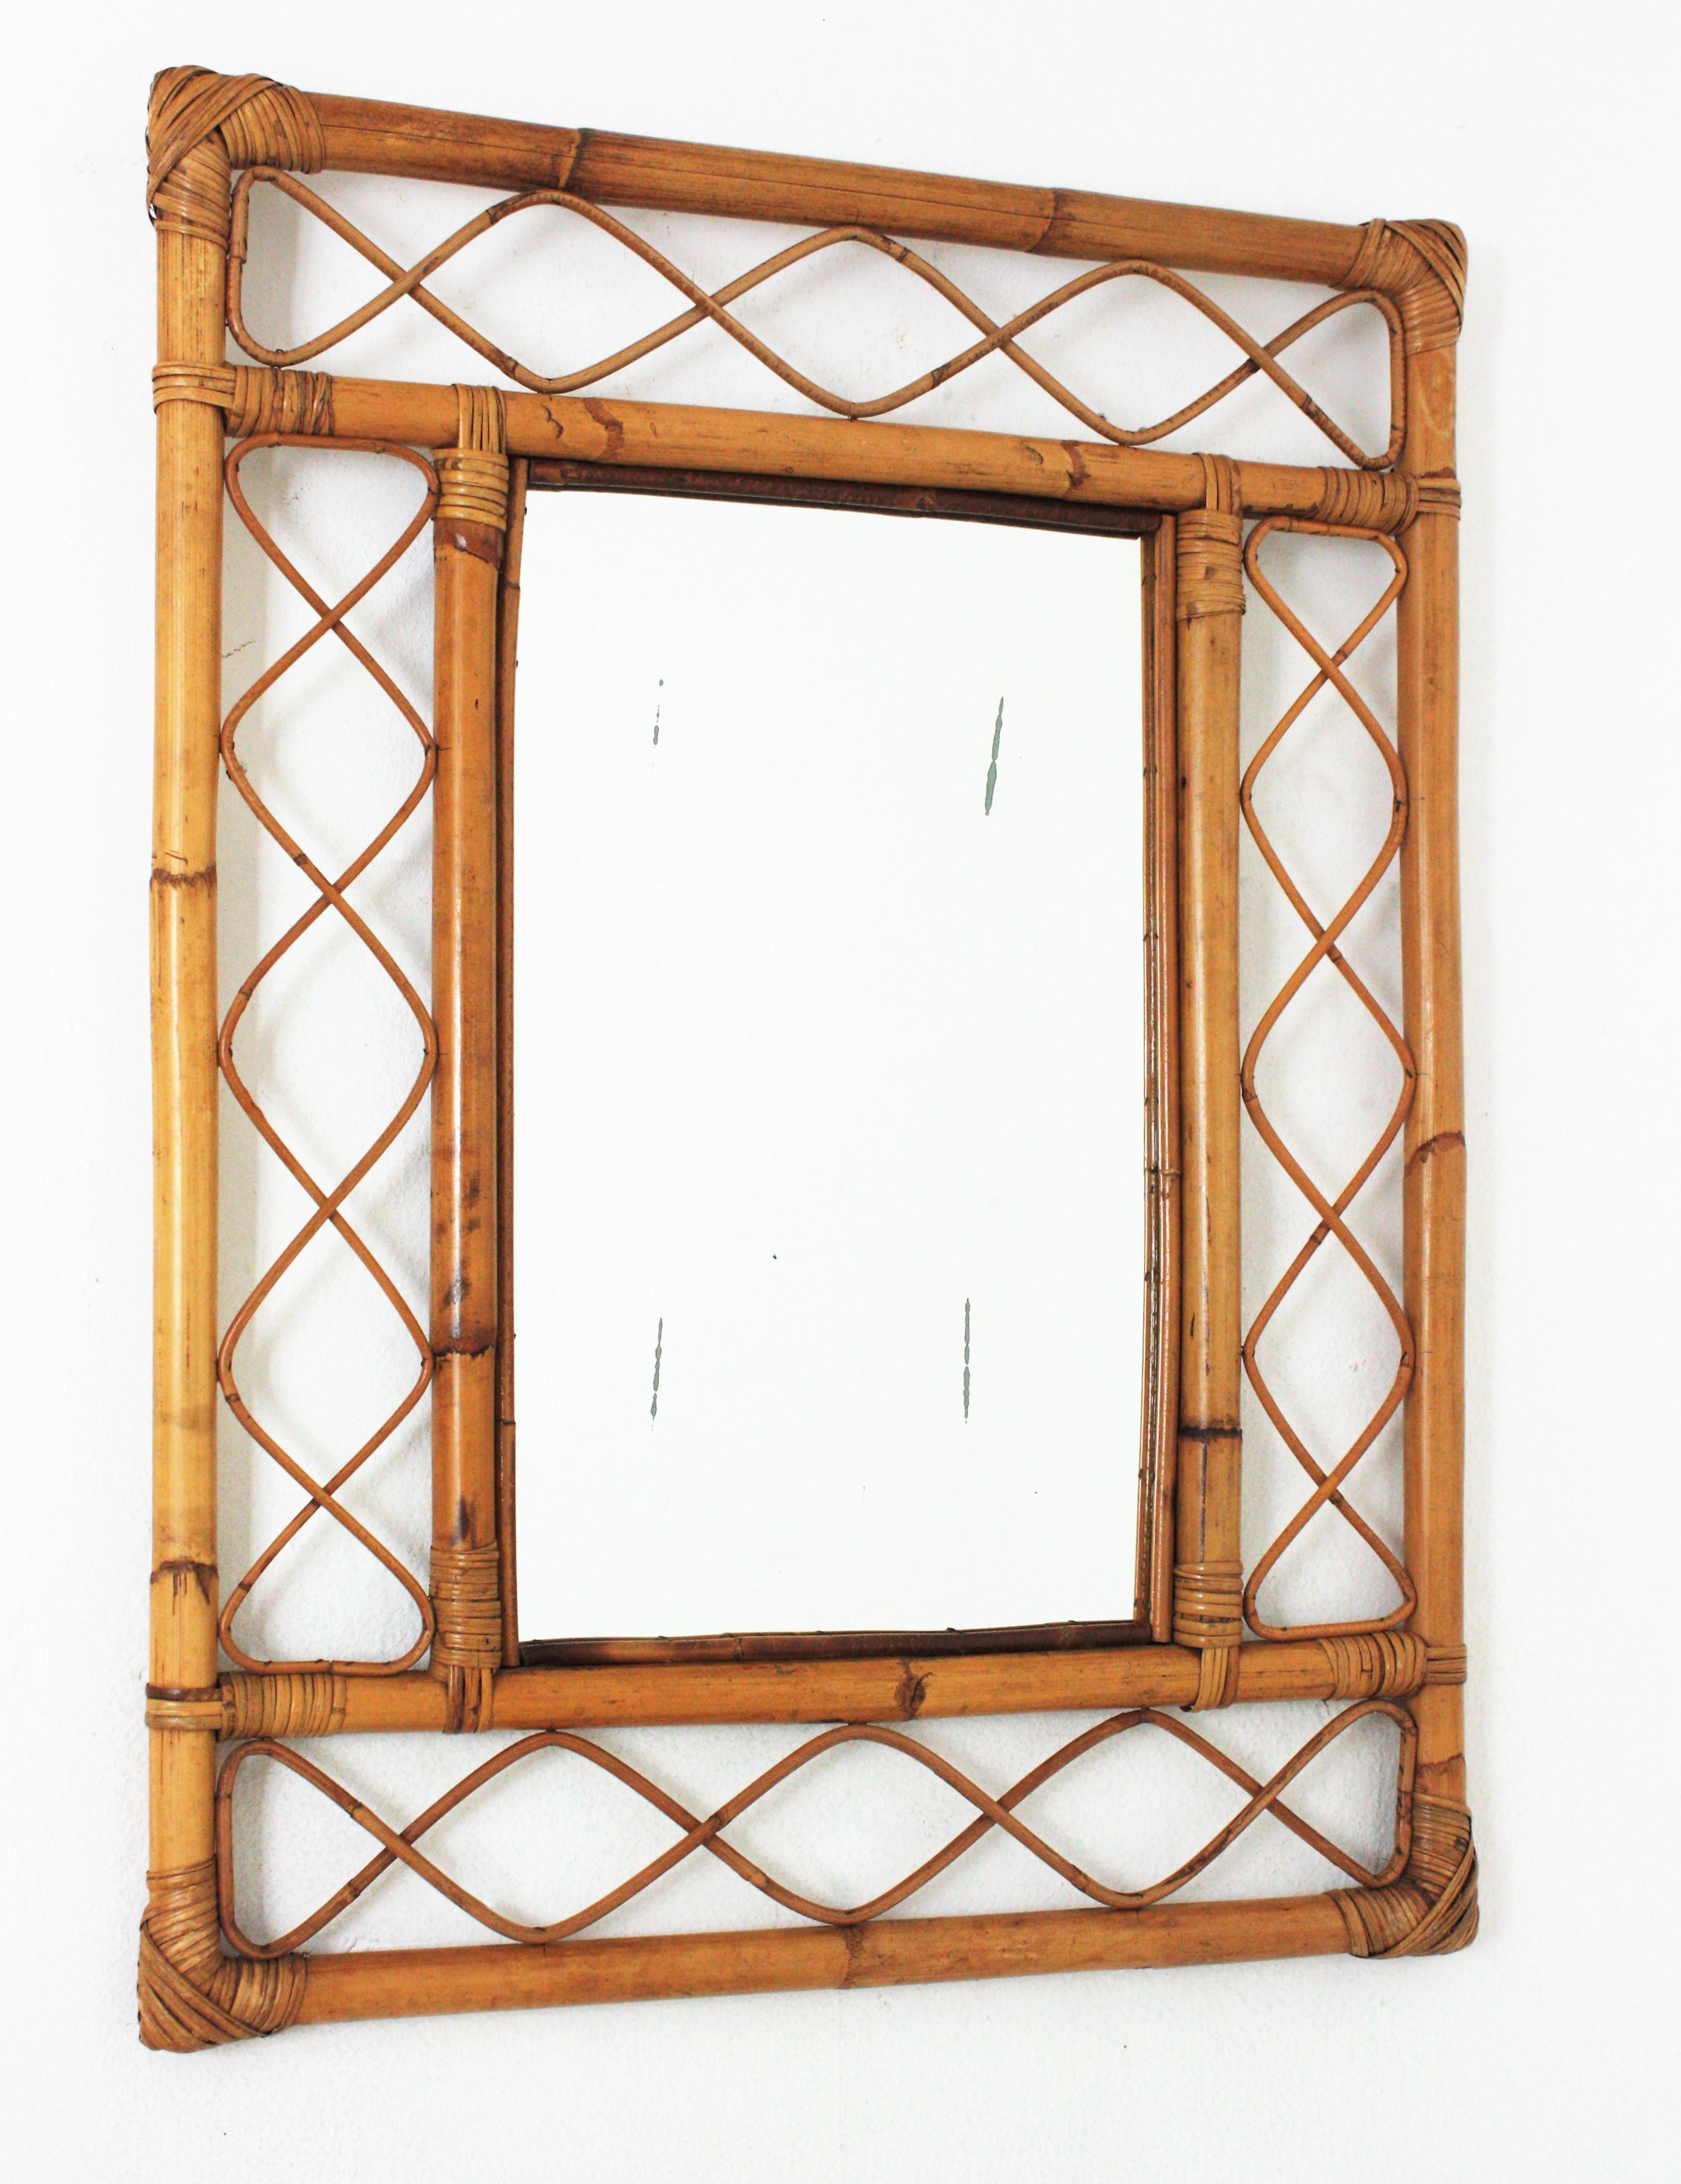 Eye-catching Mid-Century Modern Franco Albini style handcrafted bamboo and rattan mirror. Italy, 1960s.
This mirror features a double bamboo rectangular frame with decorative rattan undulations between the bamboo canes.
This bamboo mirror will be a